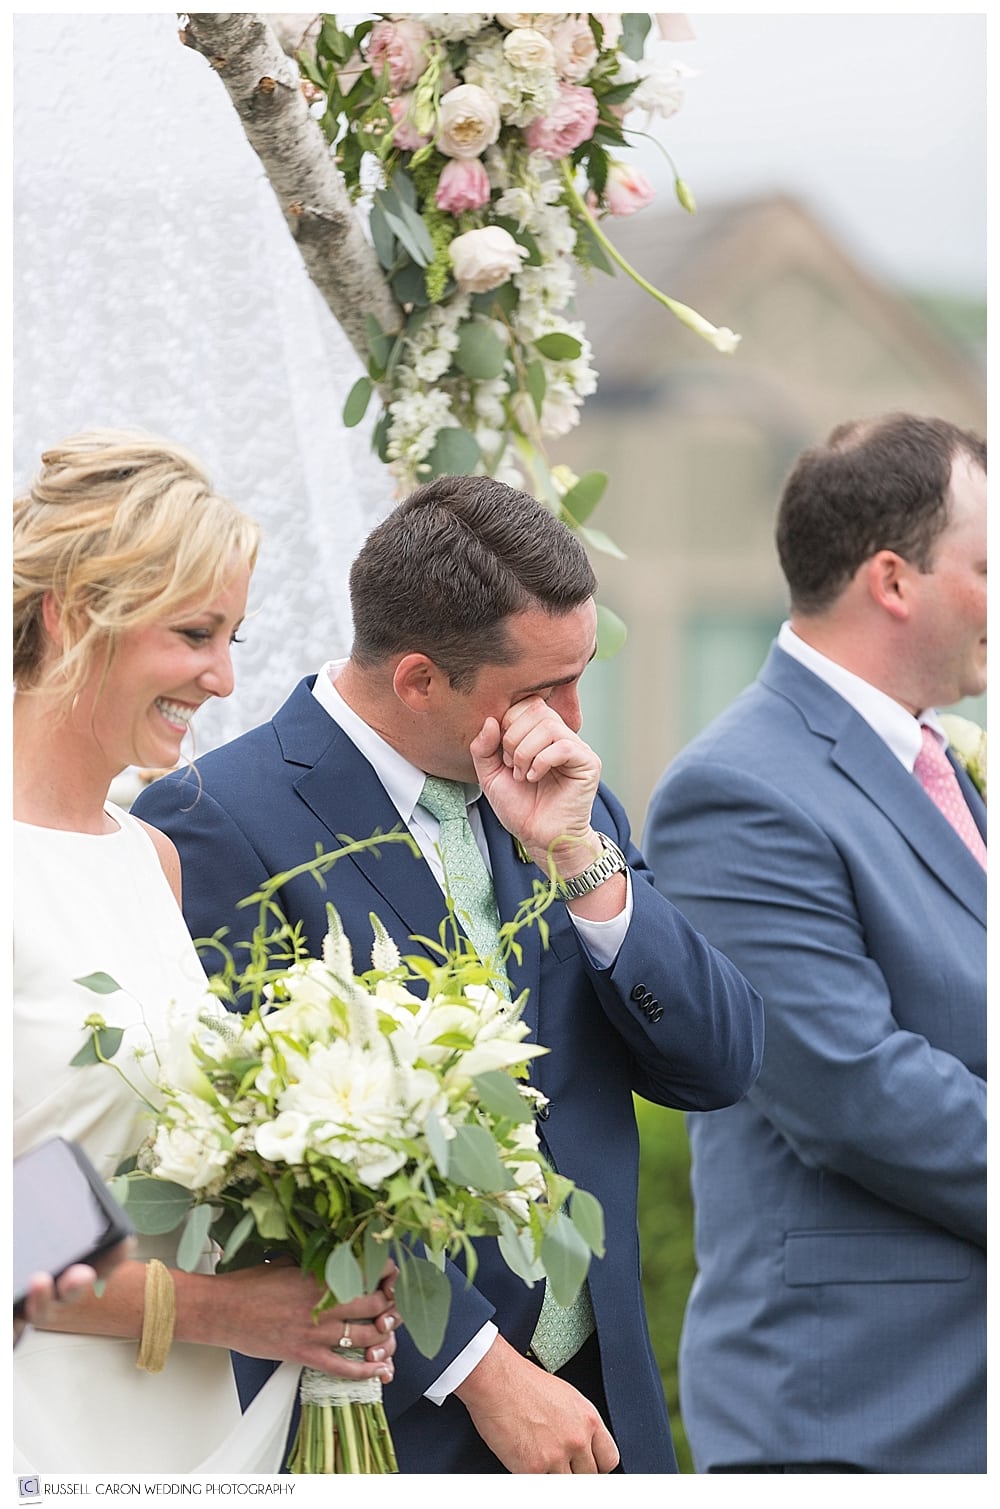 Groom wipes a tear from his eye